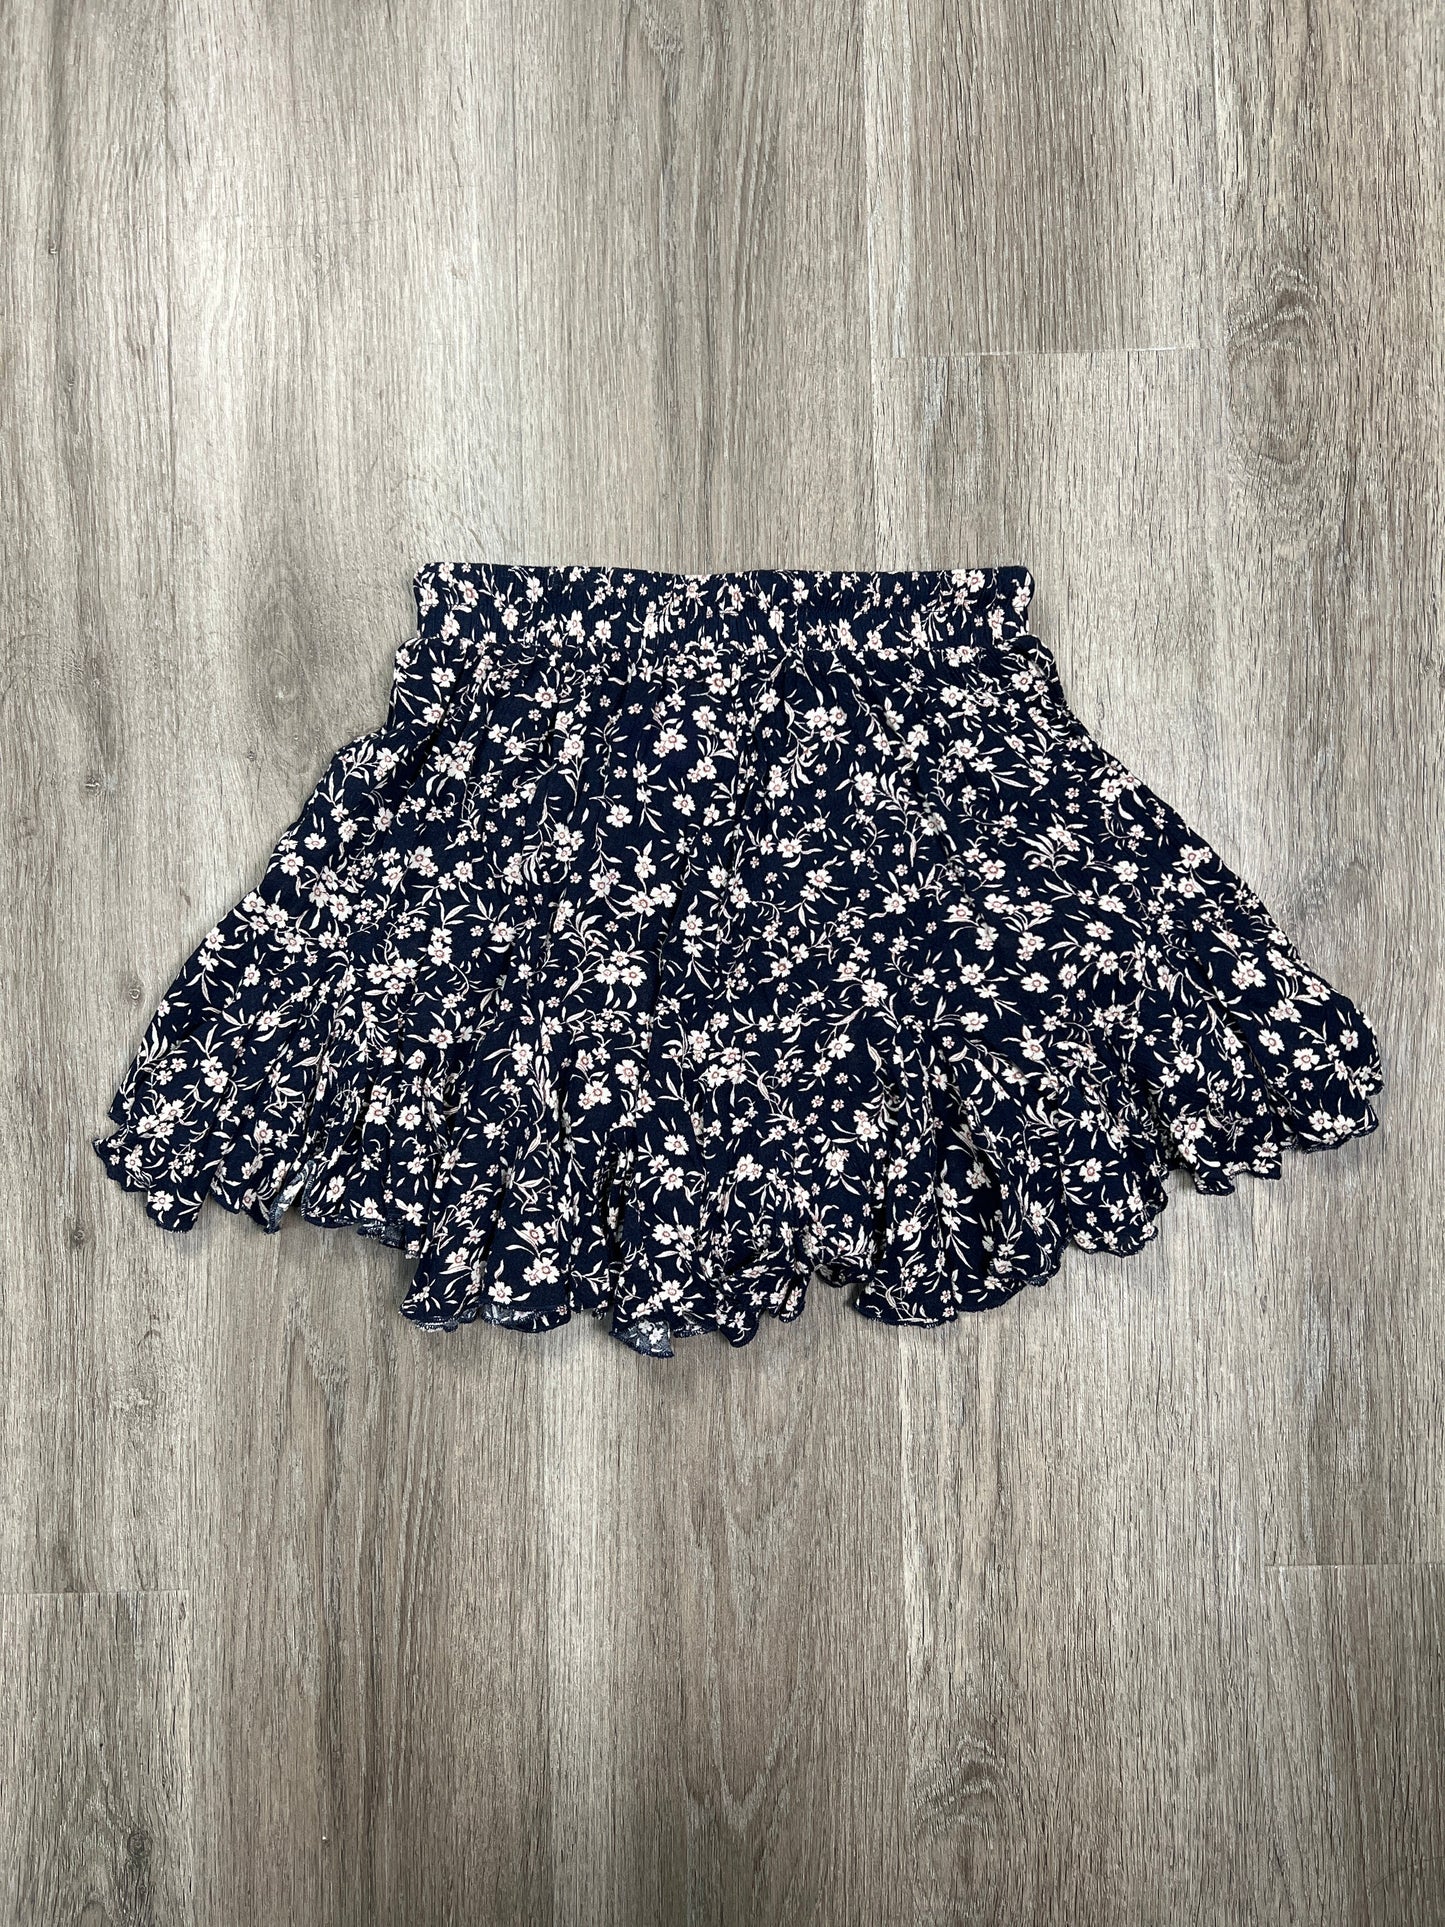 Floral Print Shorts Mable, Size S